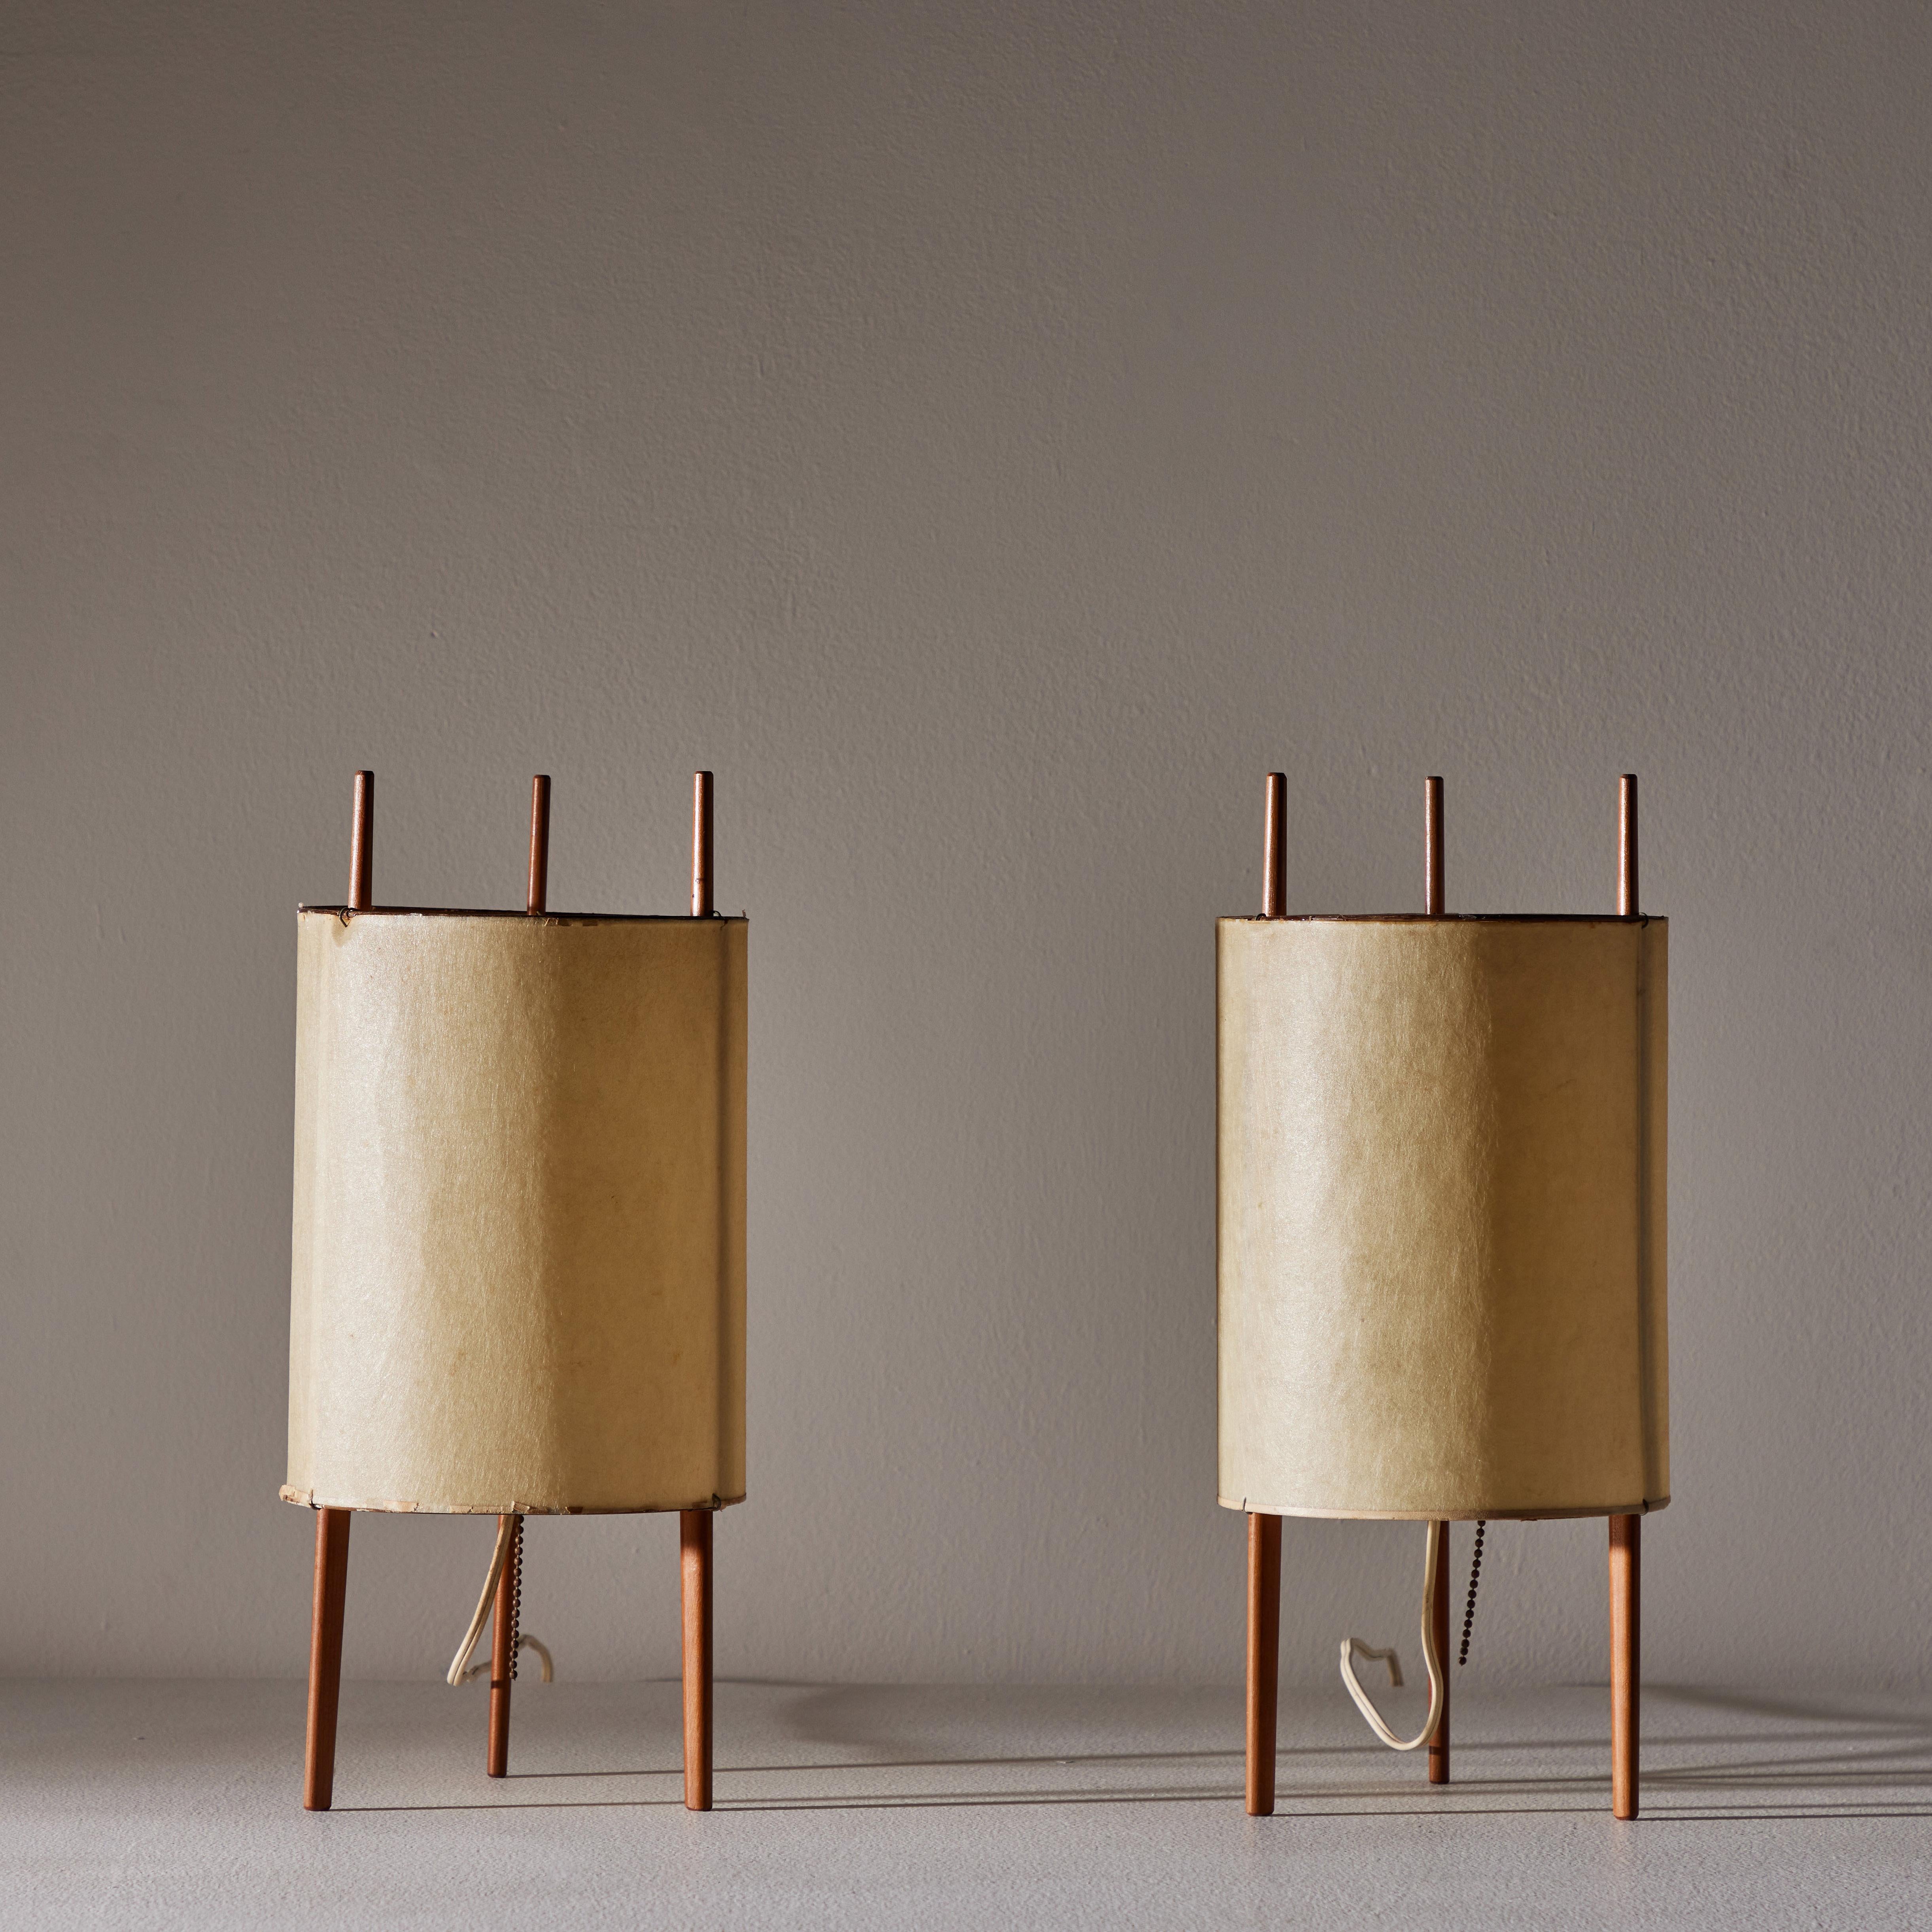 Mid-20th Century Pair of Table Lamps by Isamu Noguchi for Knoll